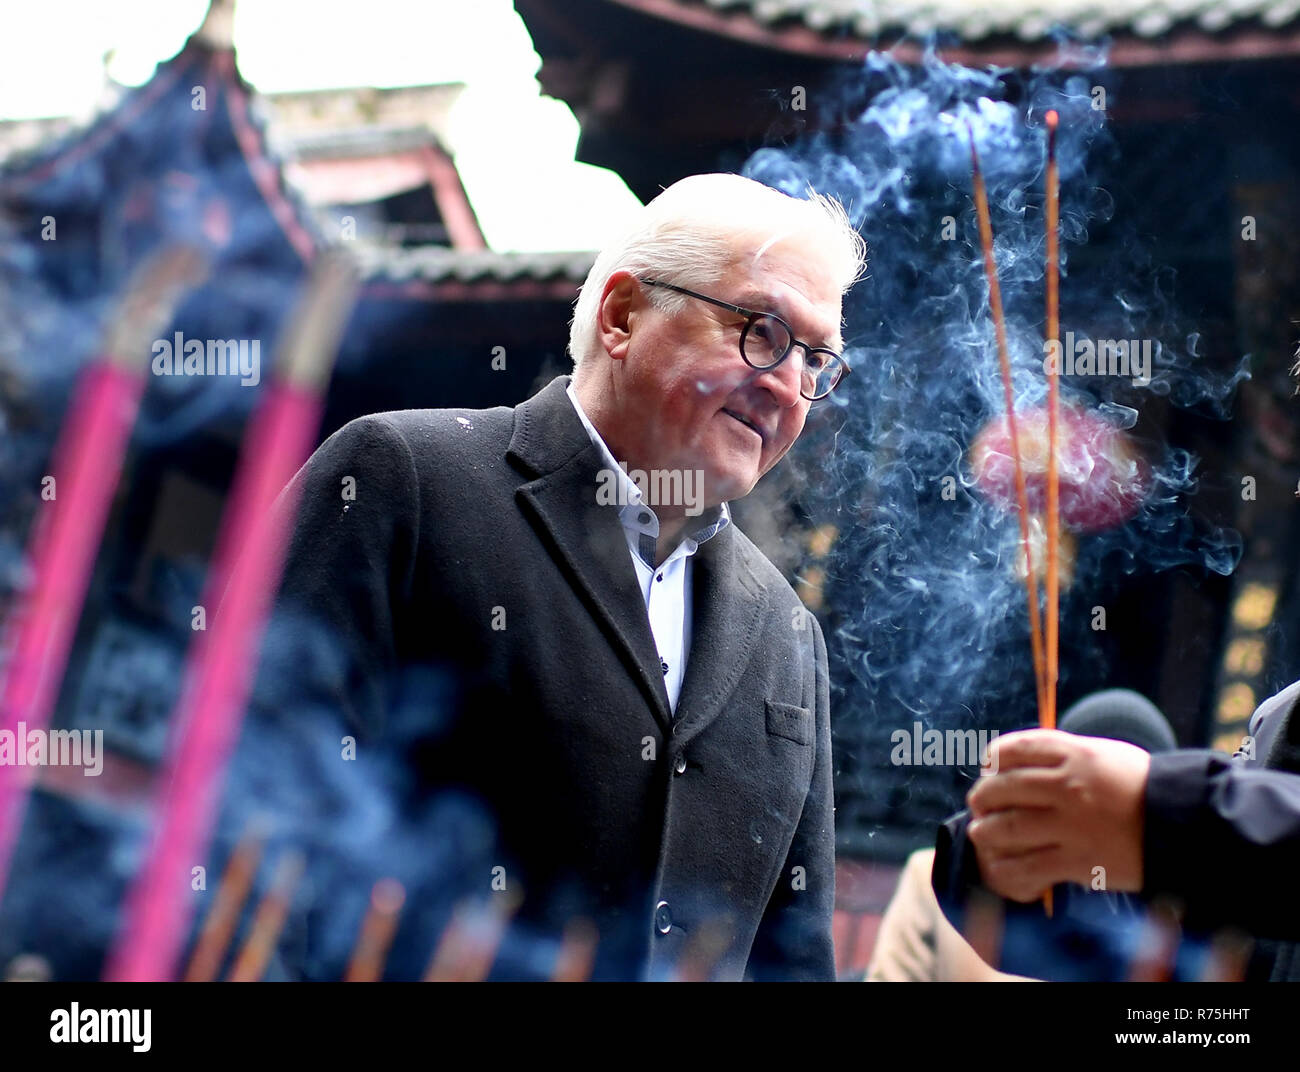 Dujiangyan, China. 08th Dec, 2018. German Federal President Frank-Walter Steinmeier lights incense sticks in Erwang Temple. President Steinmeier is on a state visit to Dujiangyan on the occasion of a six-day trip to China. Credit: Britta Pedersen/dpa-Zentralbild/dpa/Alamy Live News Stock Photo